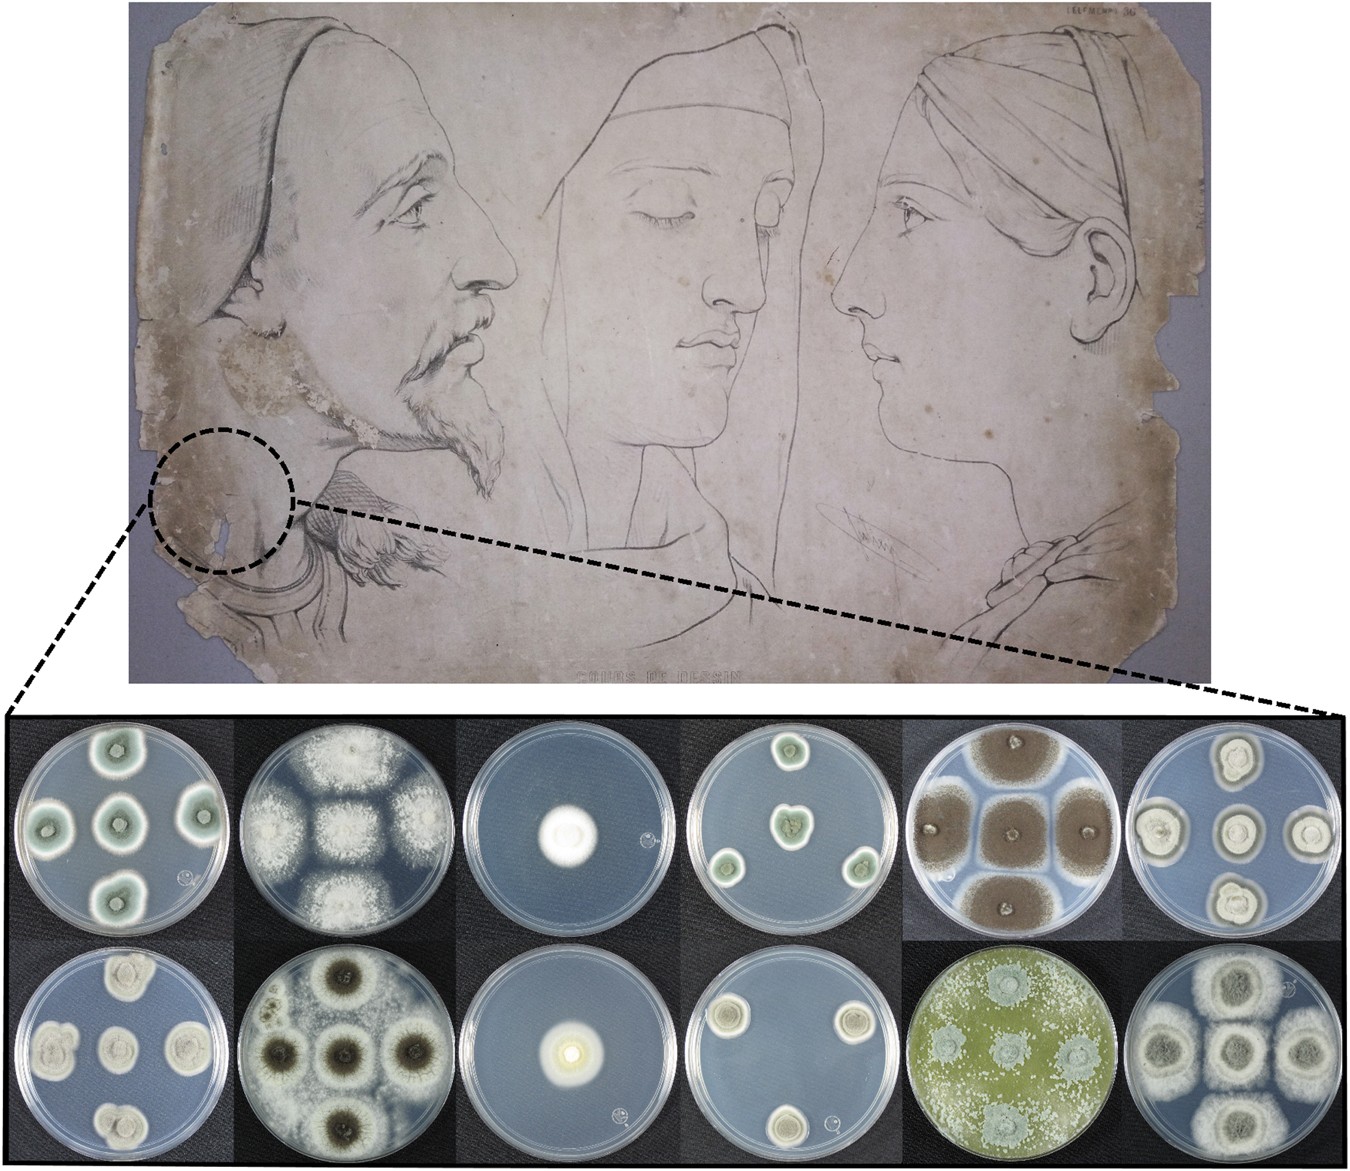 Two new cellulolytic fungal species isolated from a 19th-century art  collection | Scientific Reports